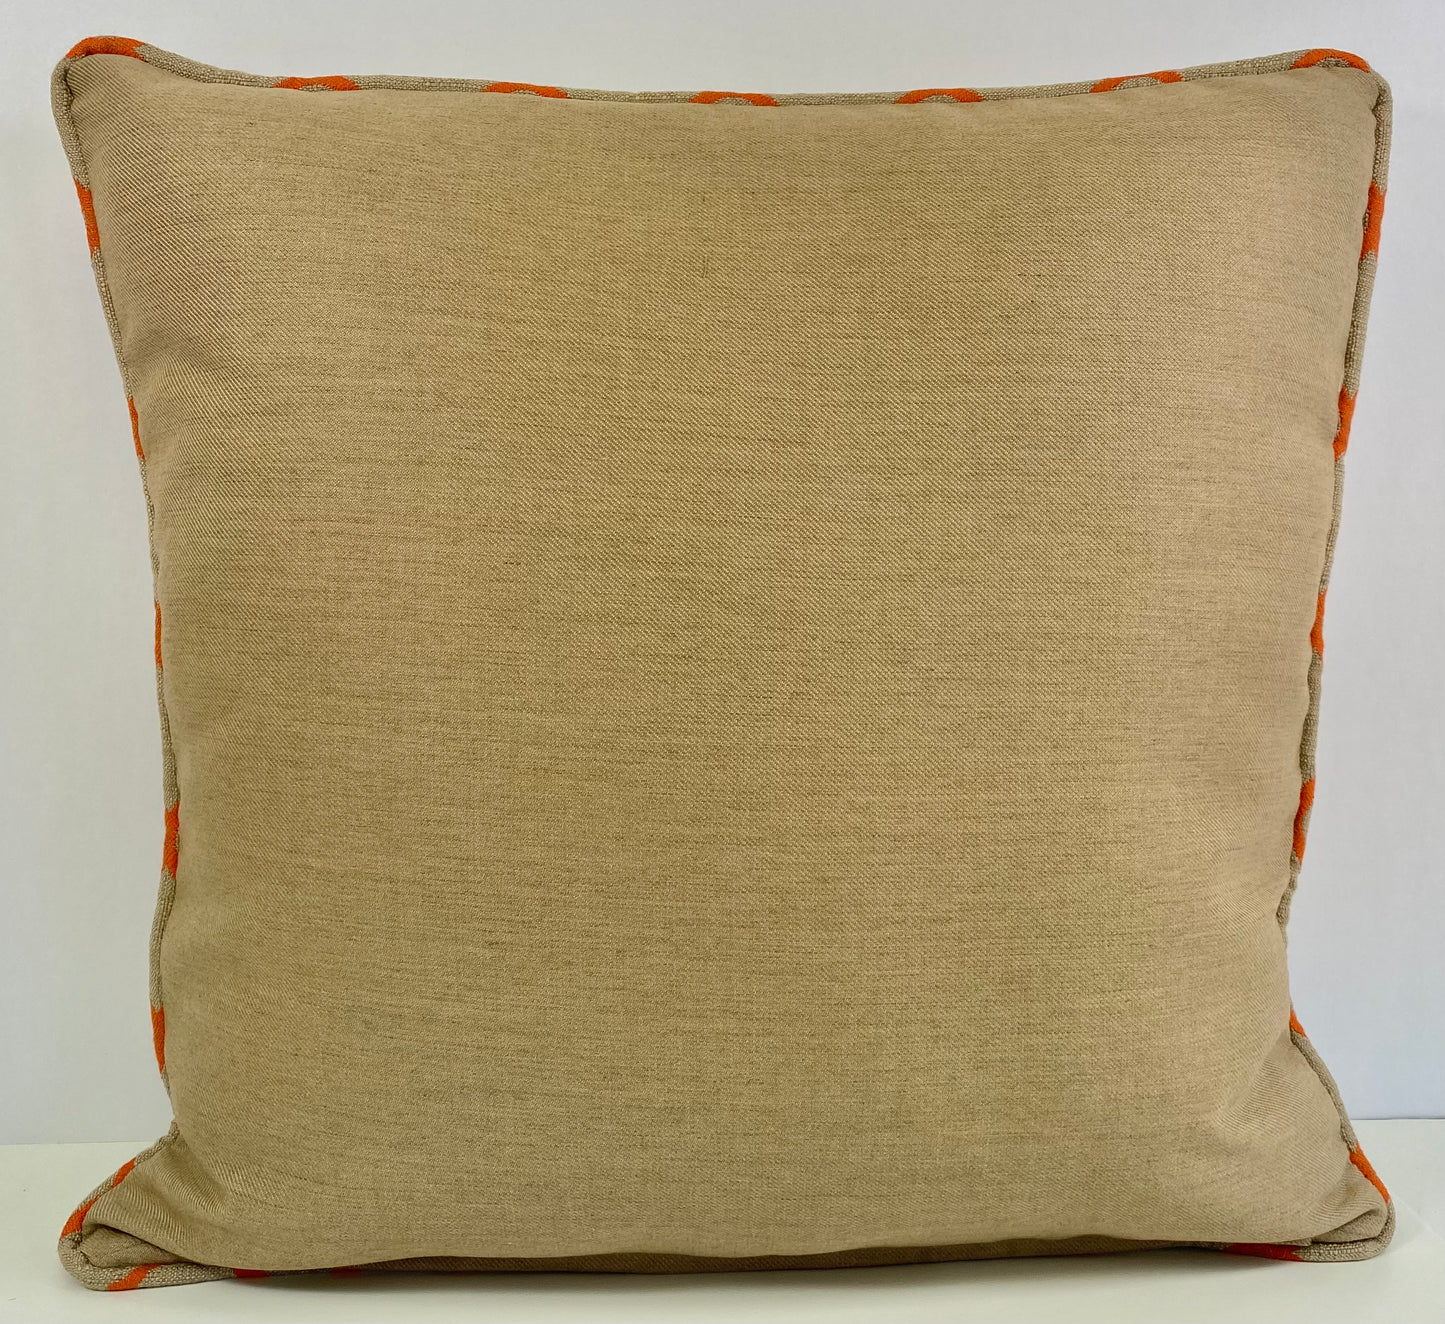 Luxury Outdoor Pillow - 22" x 22" -Casbar-Sand; Sunbrella, or equivalent, with poly fill